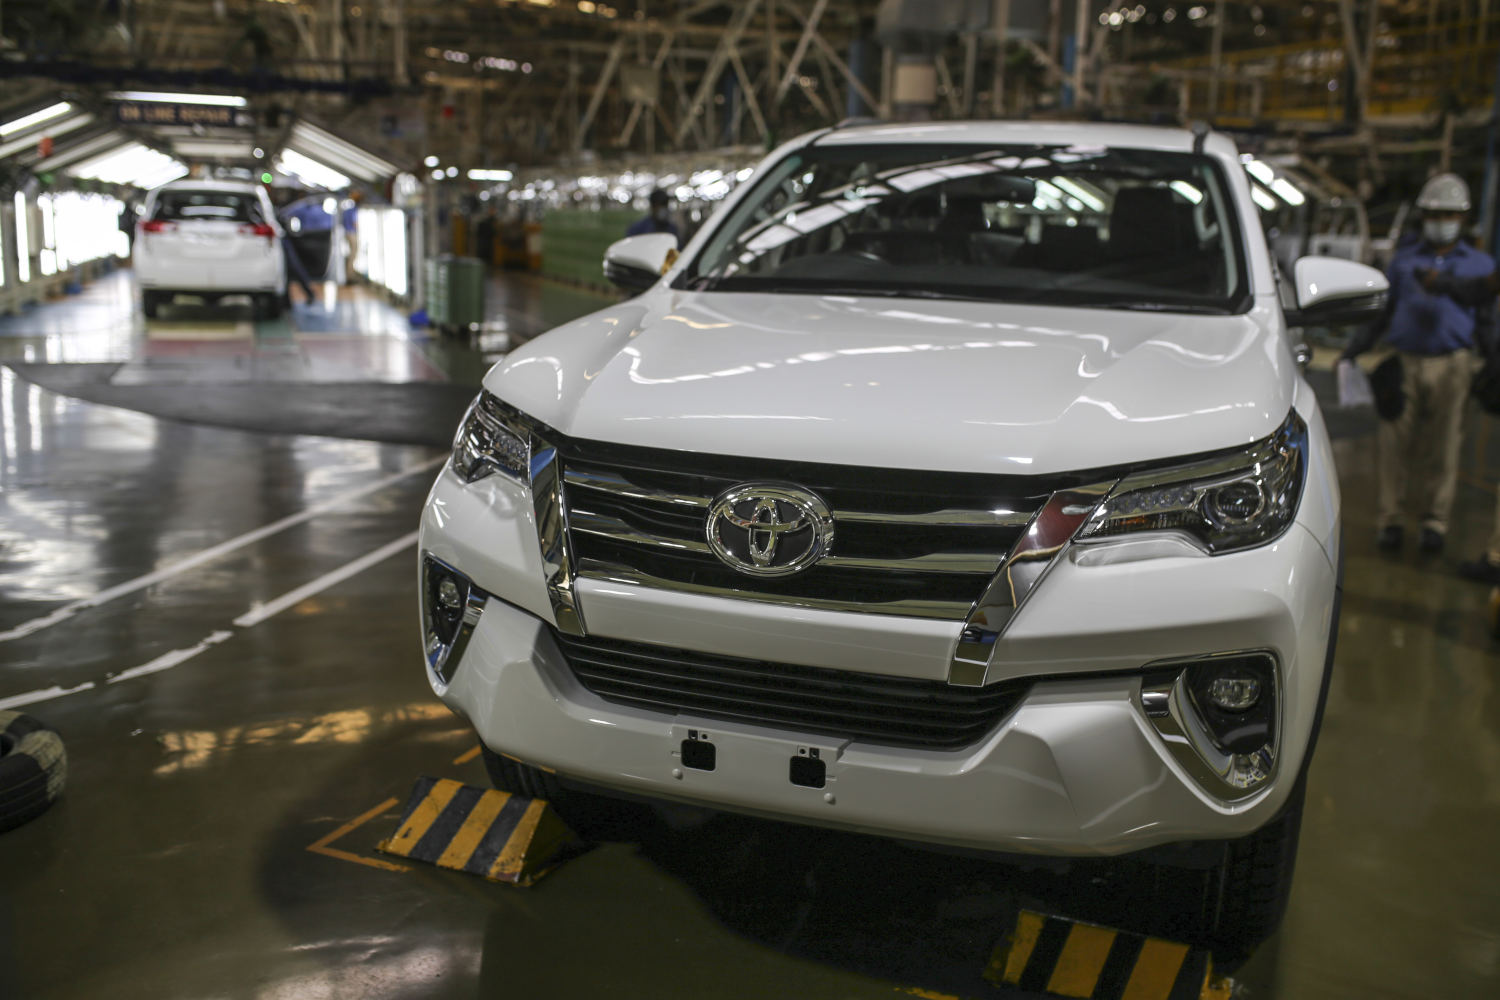 The Toyota Fortuner SUV